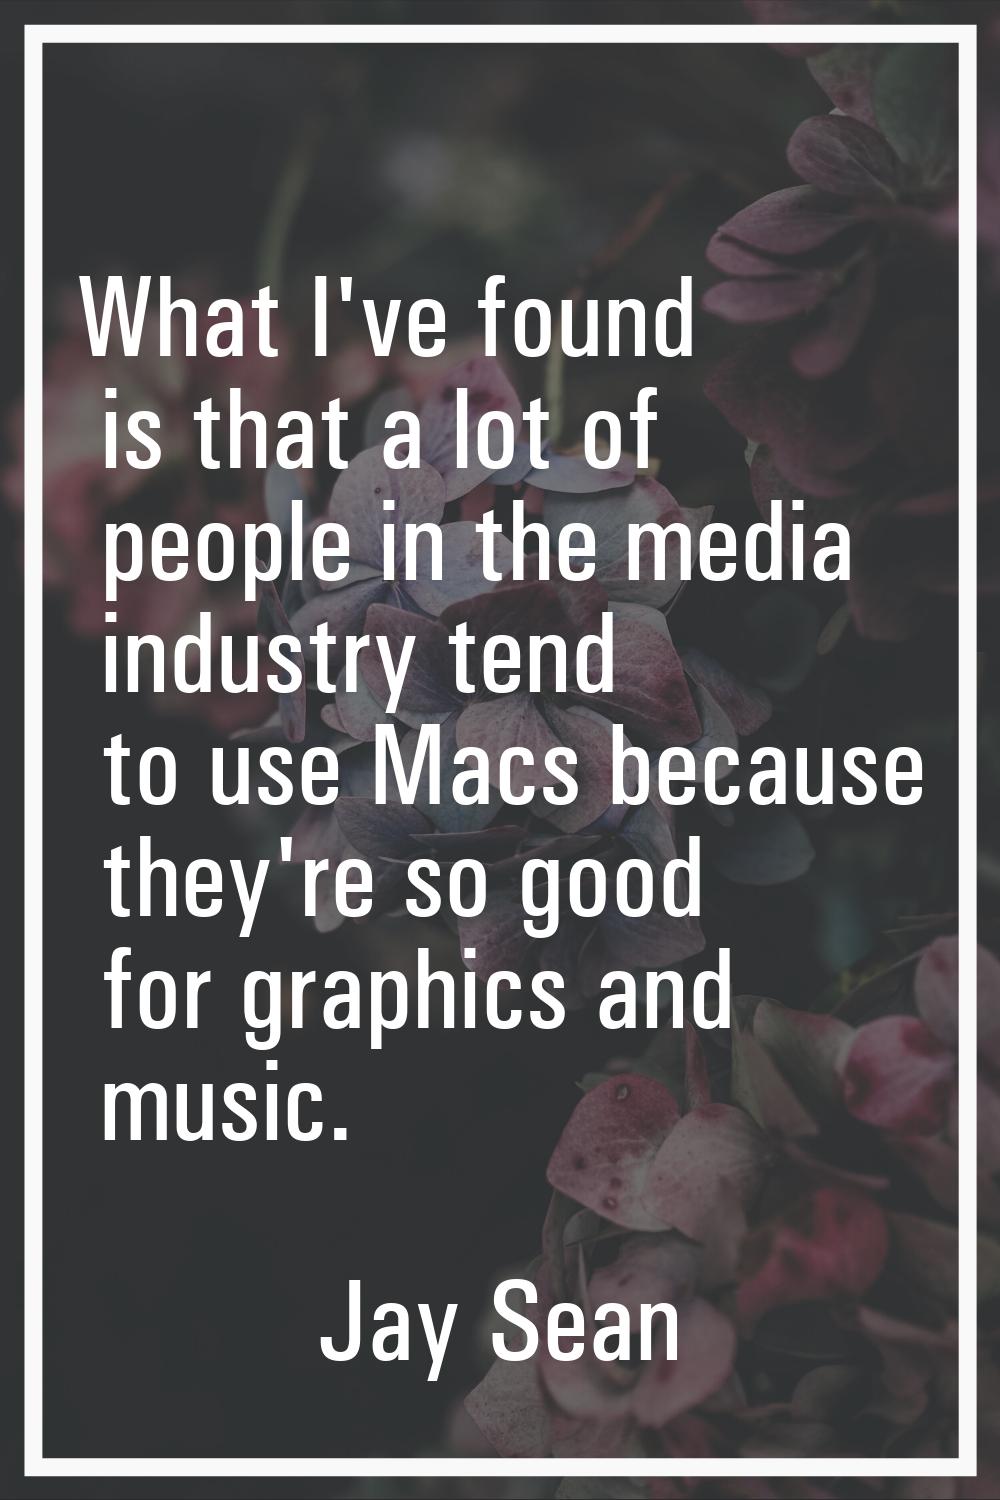 What I've found is that a lot of people in the media industry tend to use Macs because they're so g